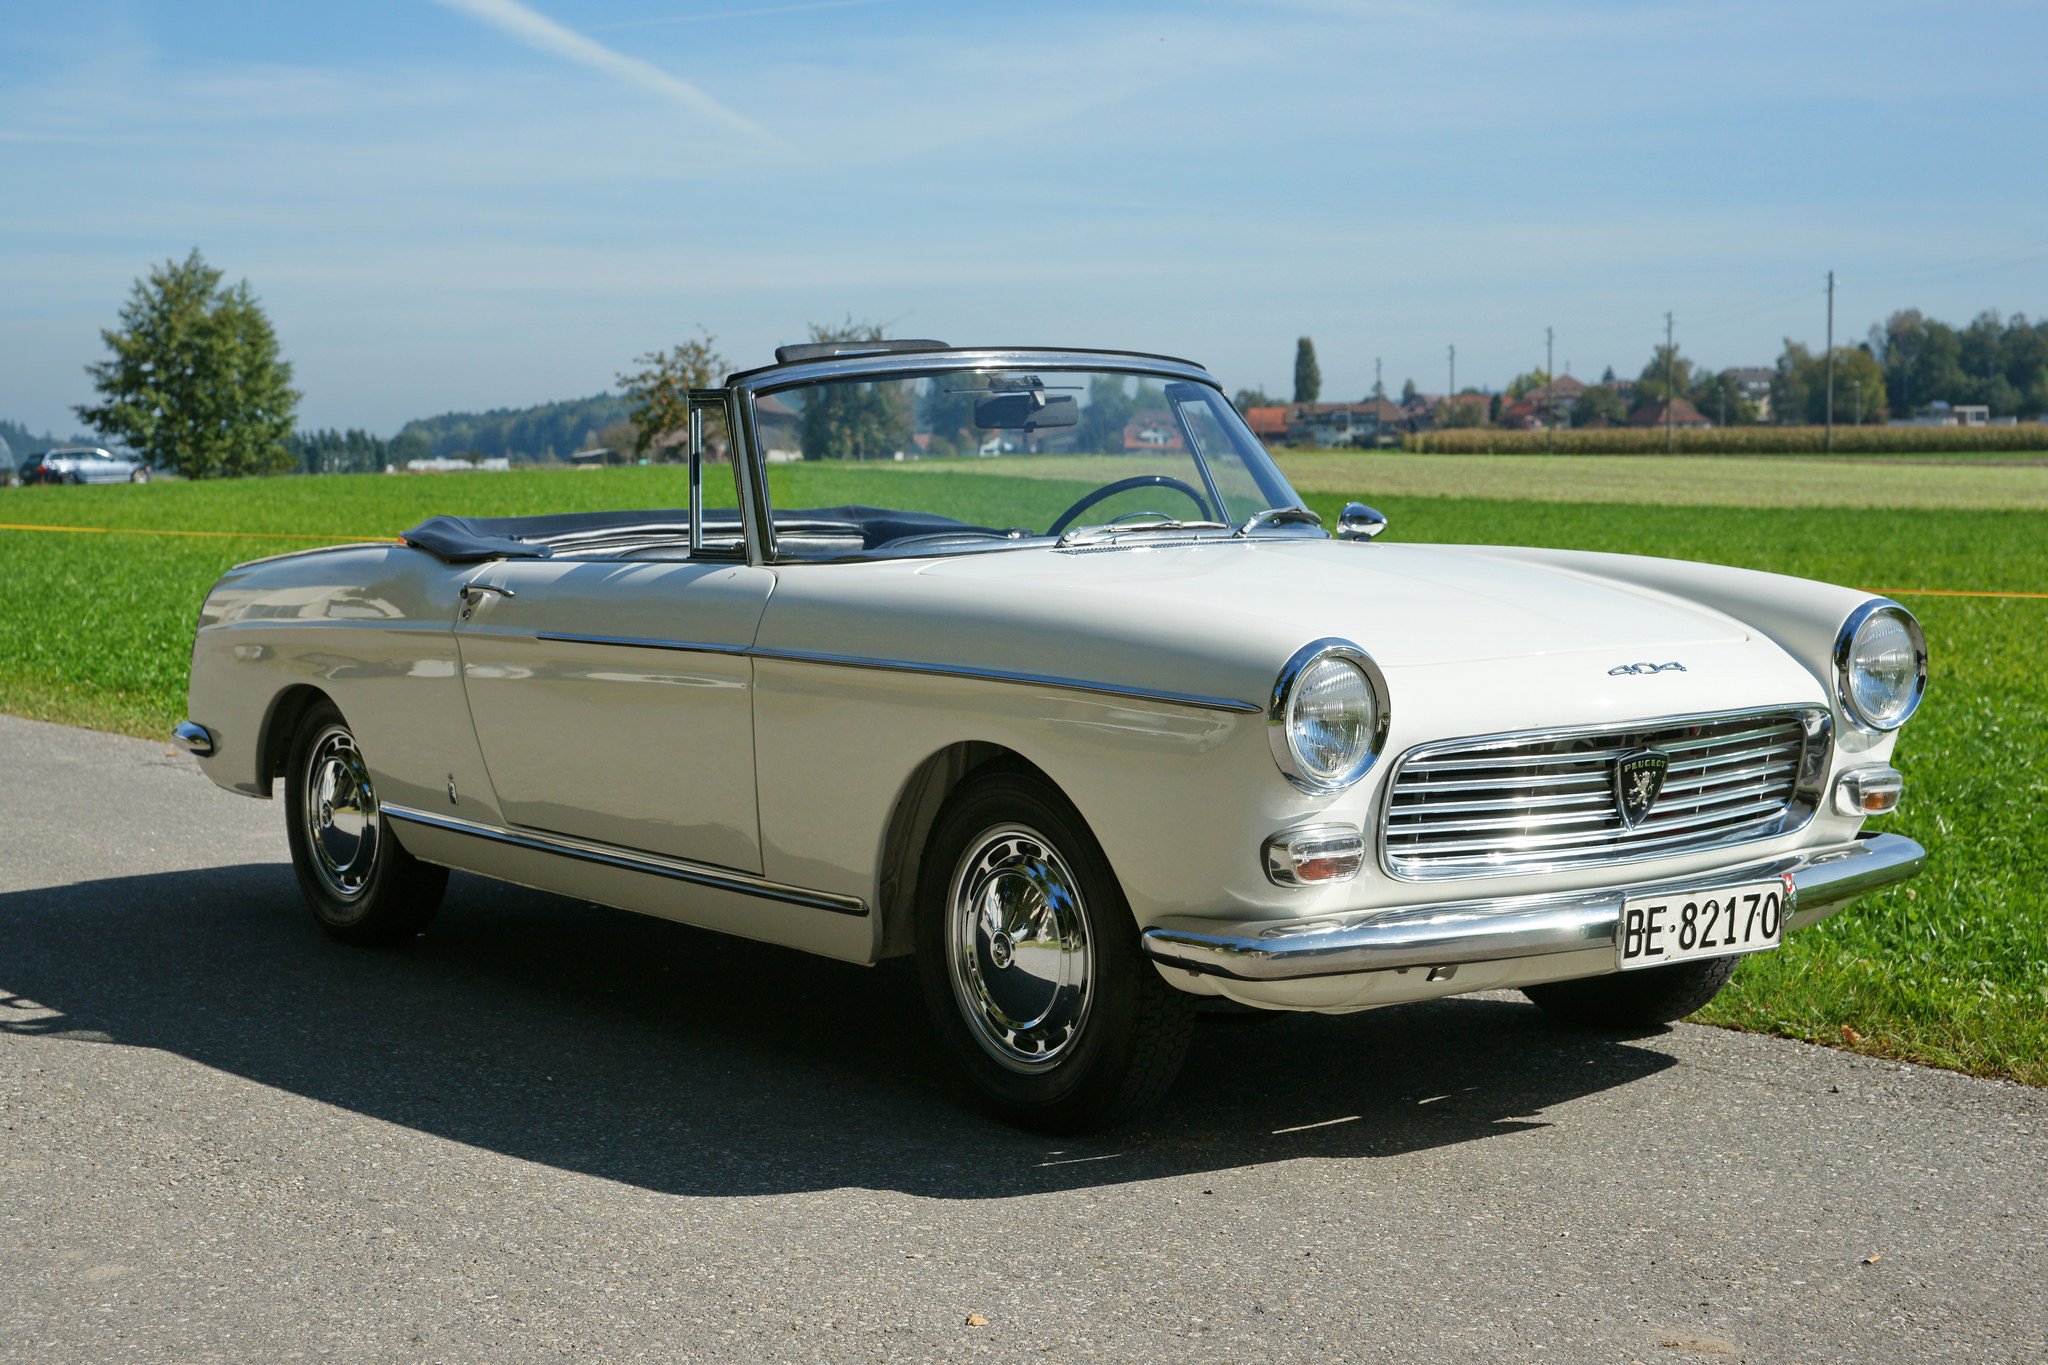 peugeot, 404, Classic, French, Cars, Cabriolet, Convertible Wallpaper